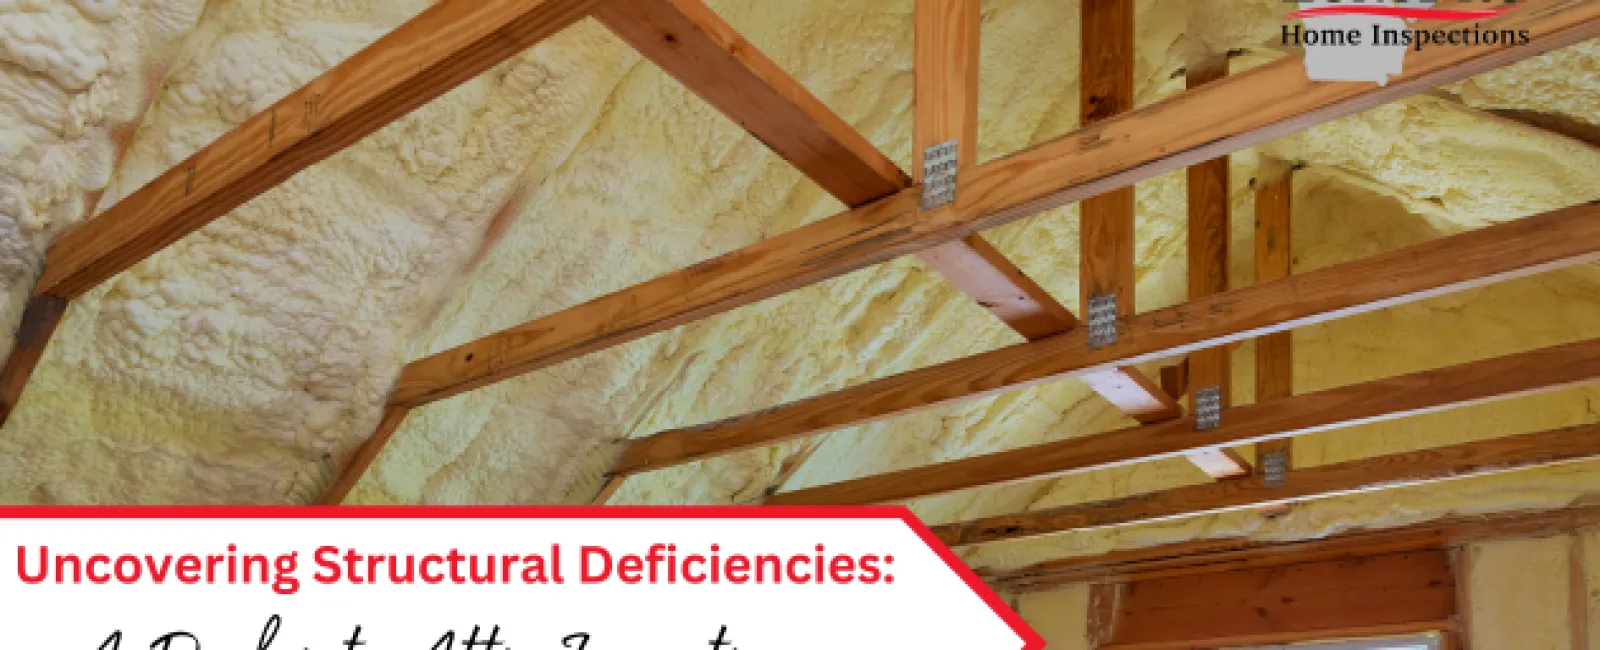 Uncovering Structural Deficiencies: A Peek into Attic Inspections